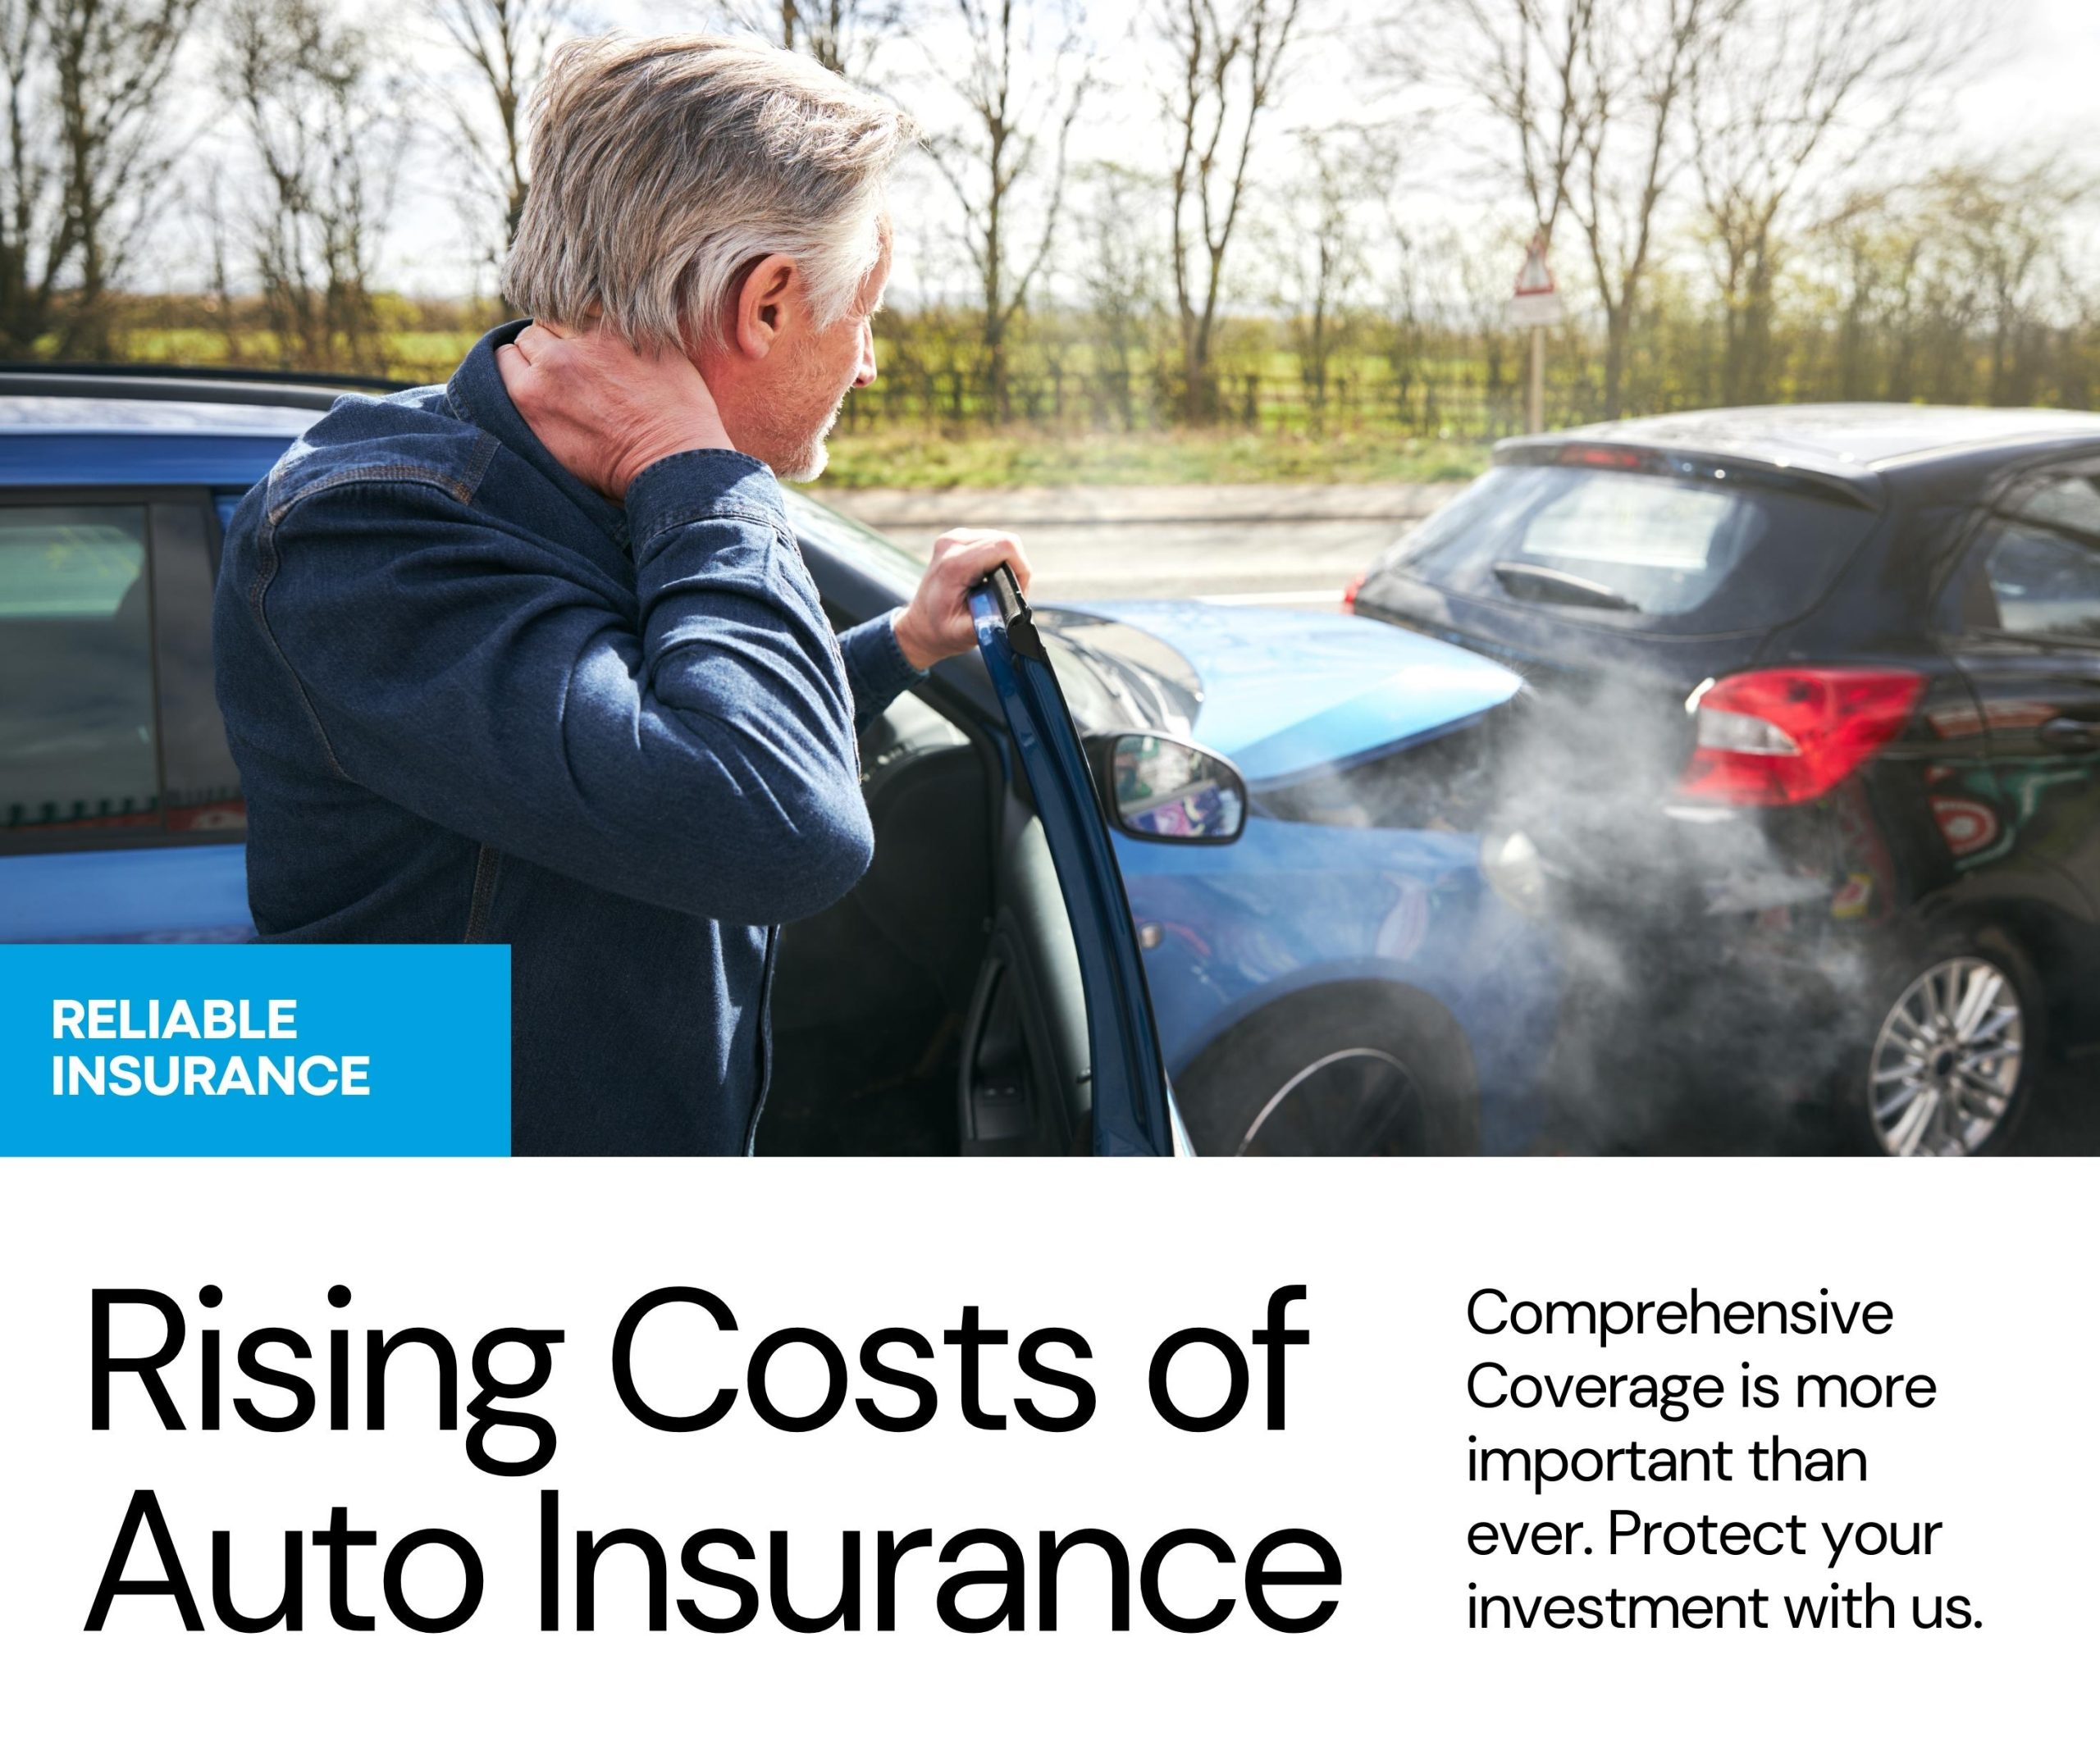 The Rising Costs of Auto Insurance: Why You Need Comprehensive Coverage Now More Than Ever